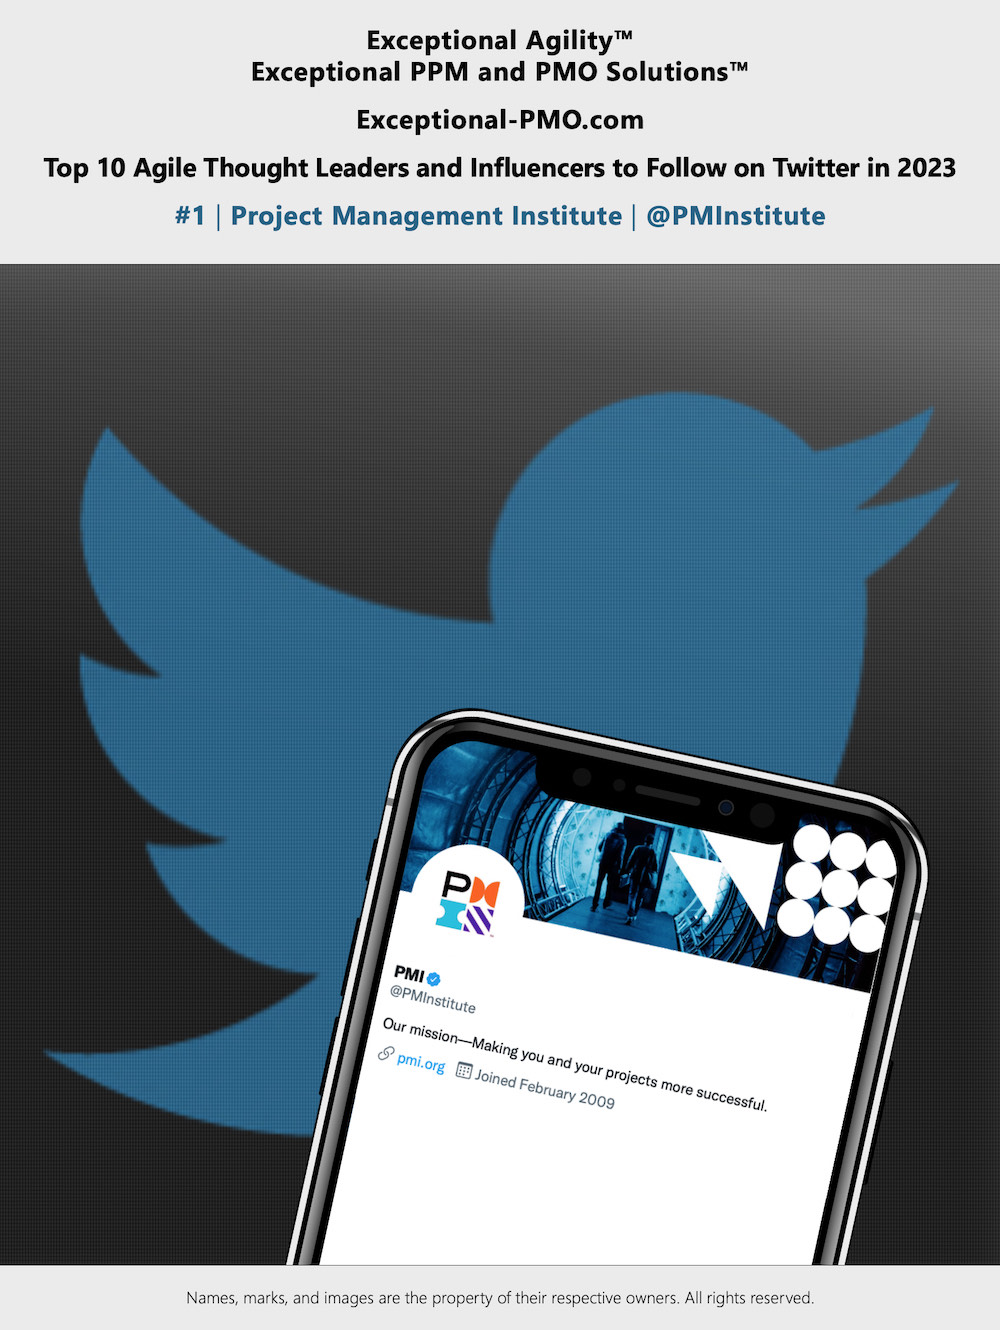 Exceptional-PMO_com - Top 10 Agile Thought Leaders and Influencers to Follow on Twitter in 2023 - 01 - lr - sq